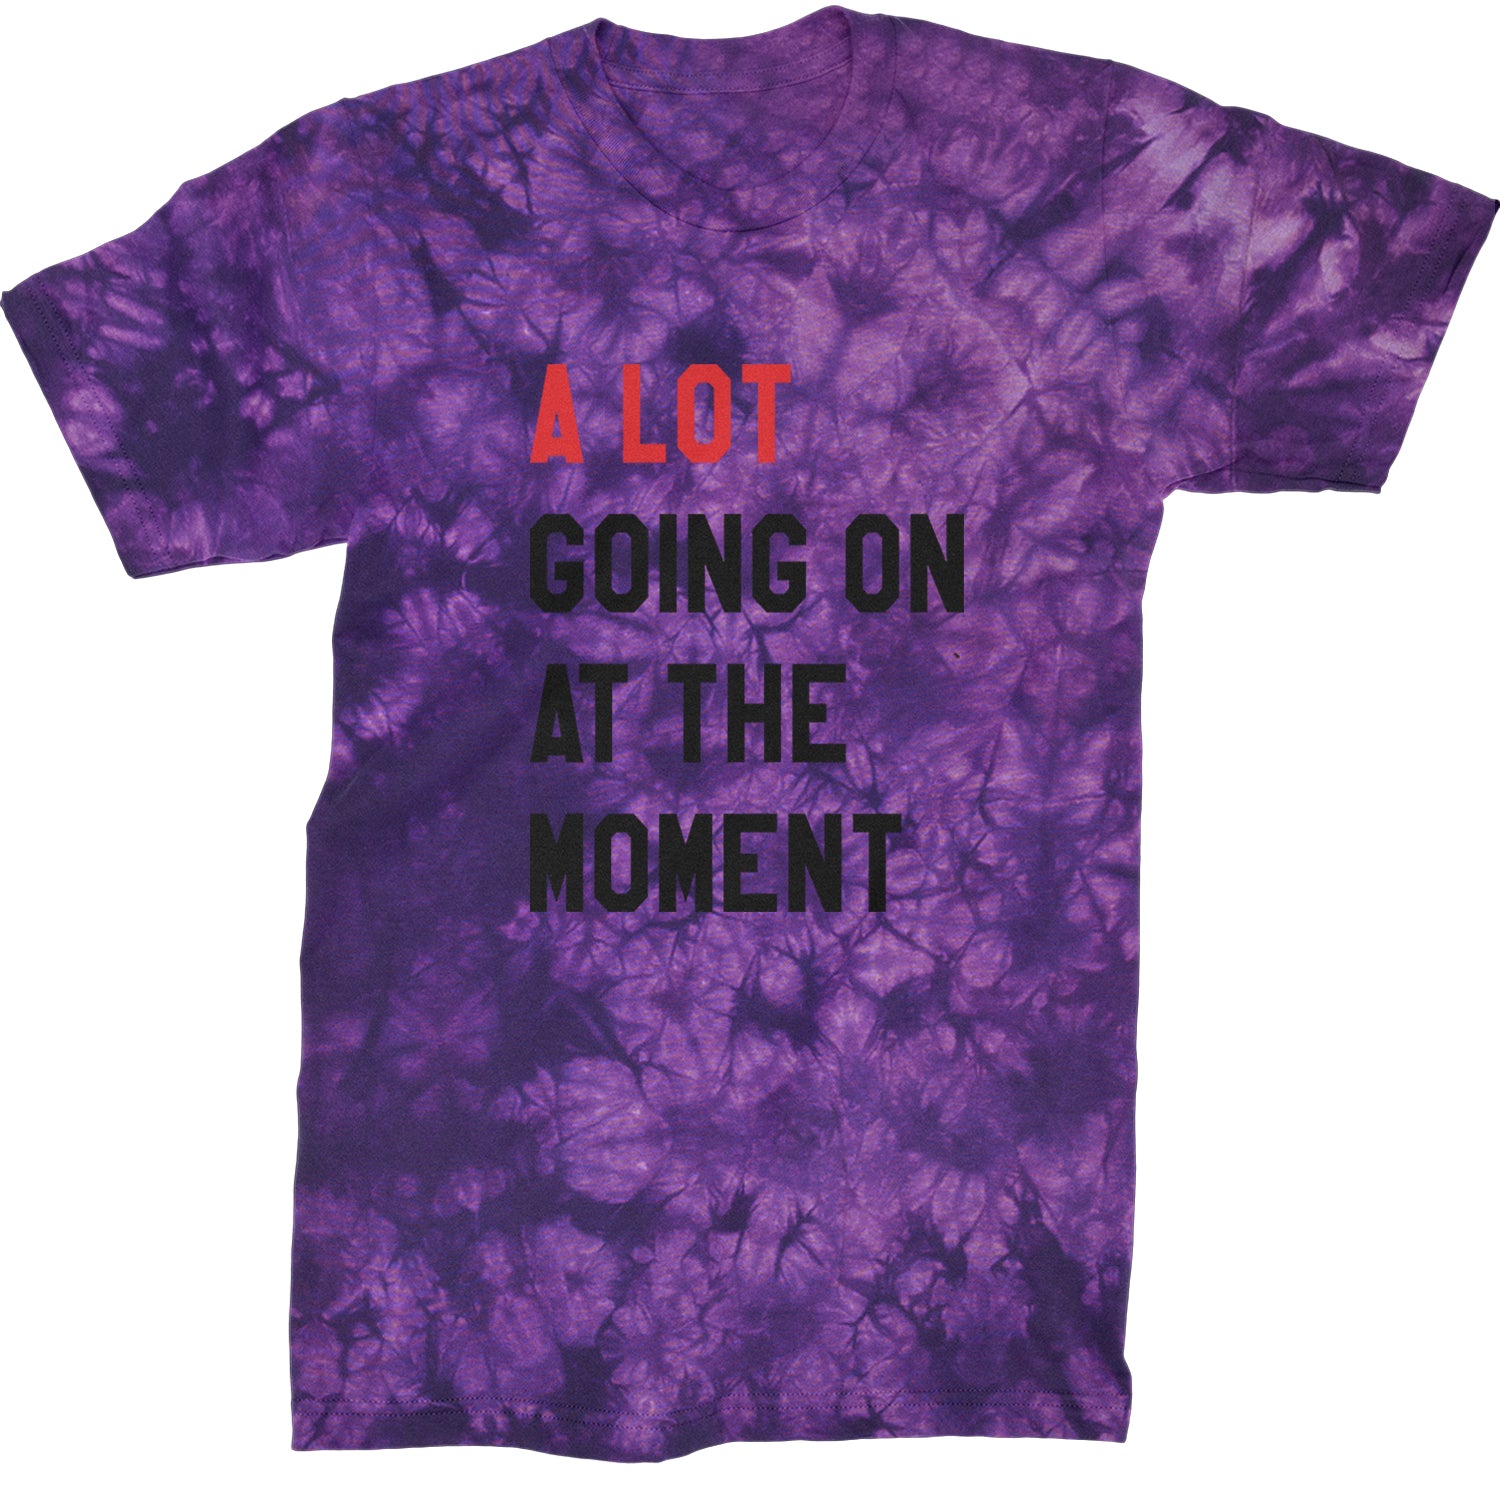 A Lot Going On At The Moment New TTPD Poet Department Mens T-shirt Tie-Dye Crystal Purple